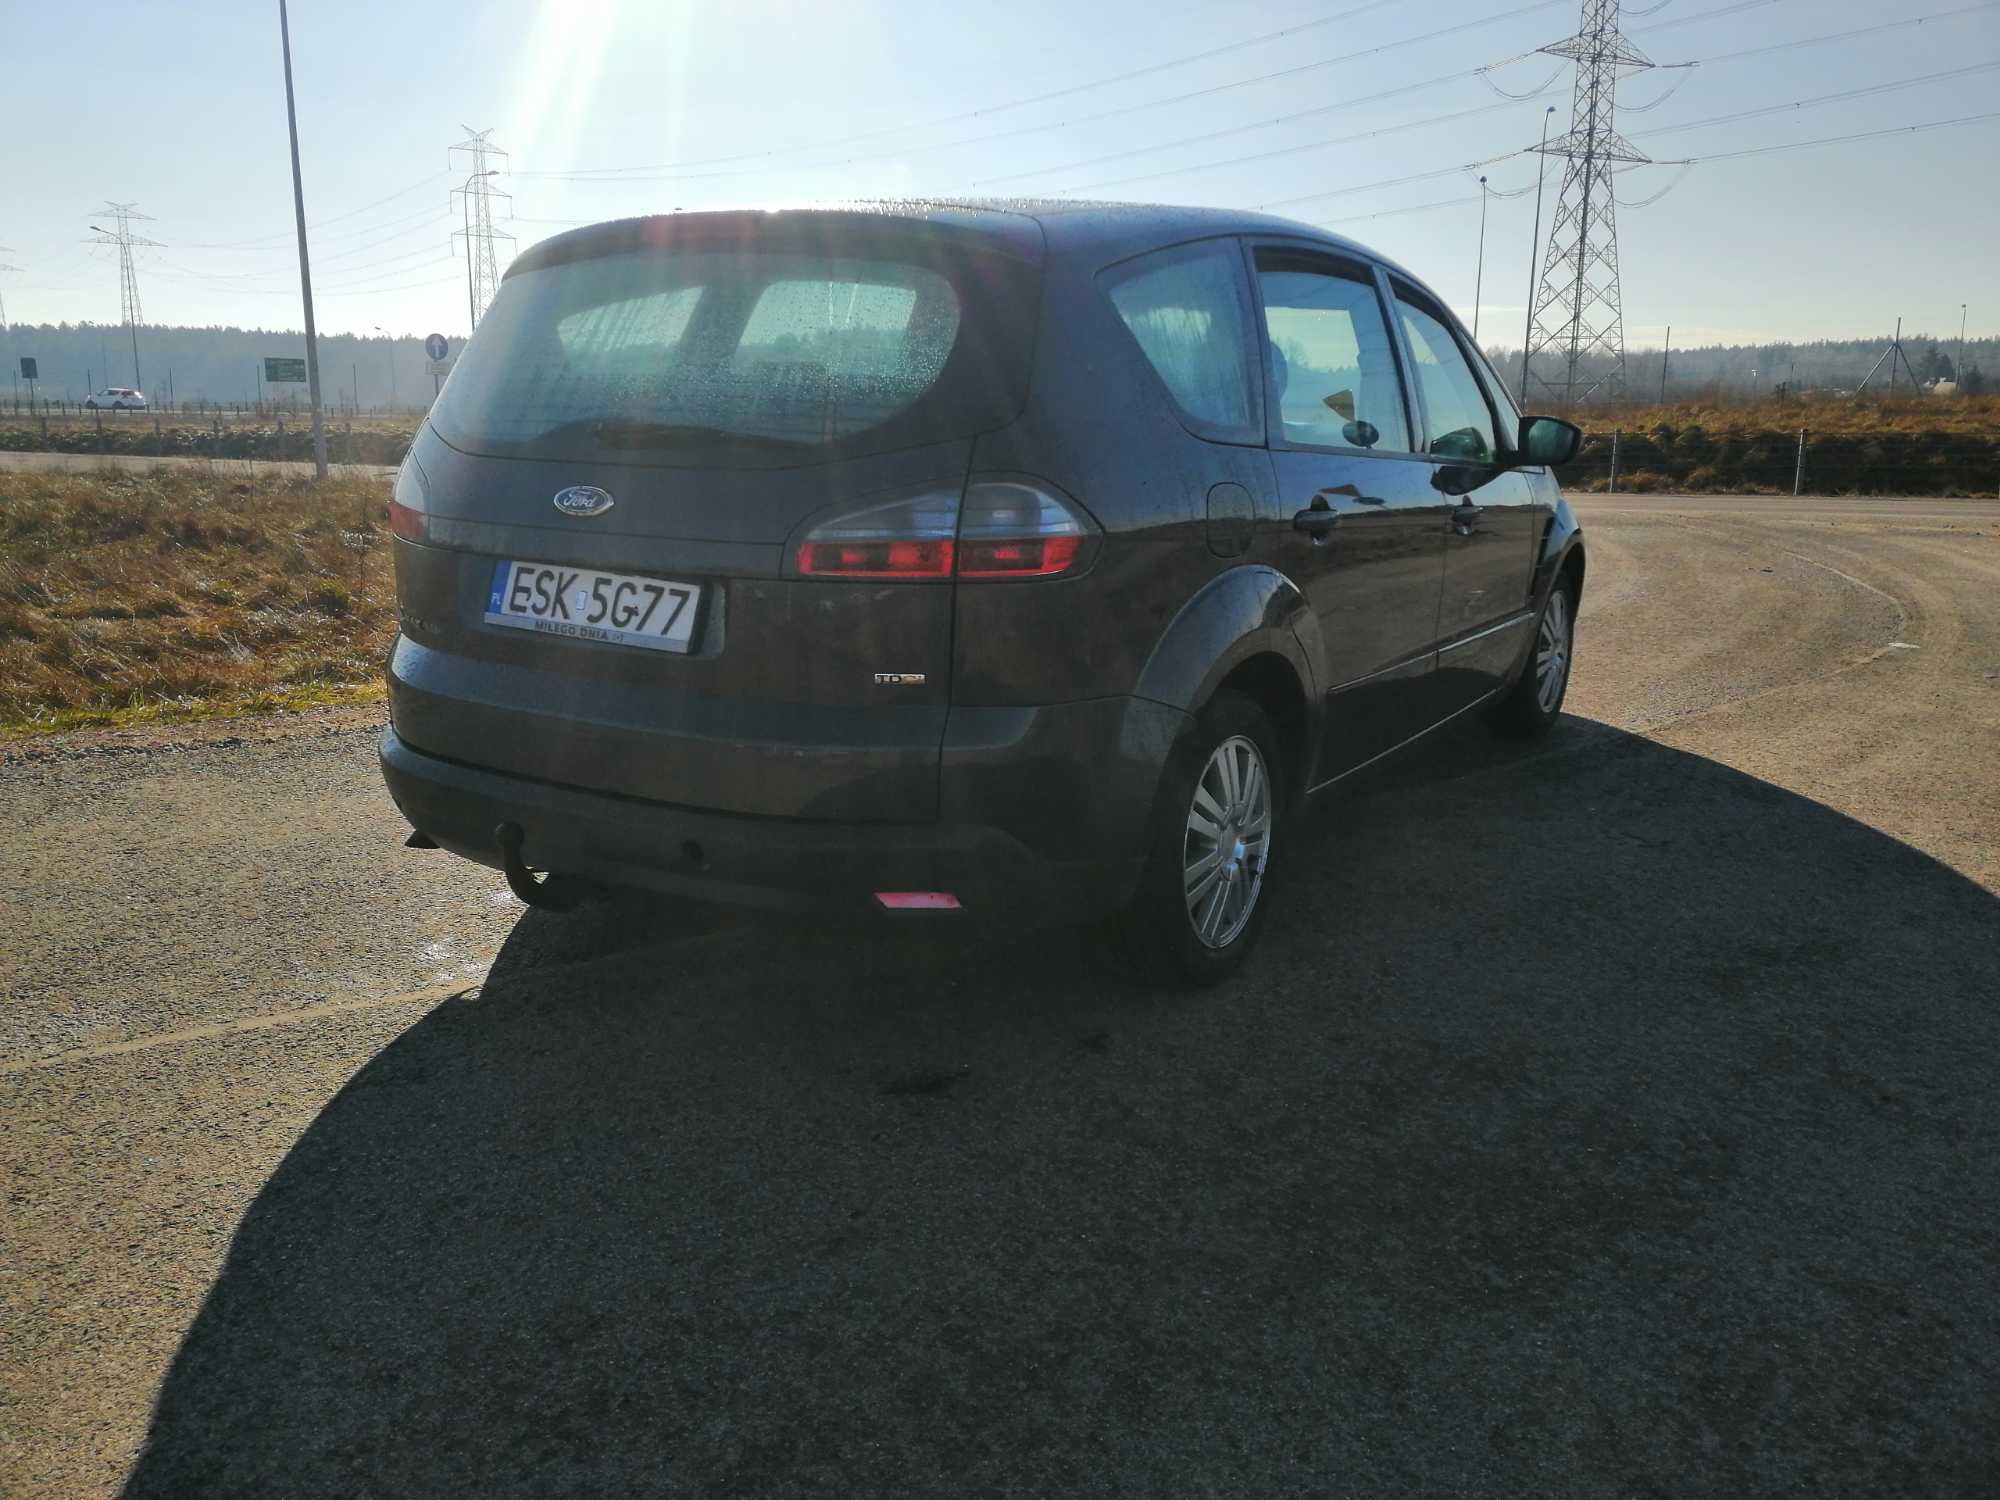 Ford SMax 1,8 tdci 125km 7 osobowy